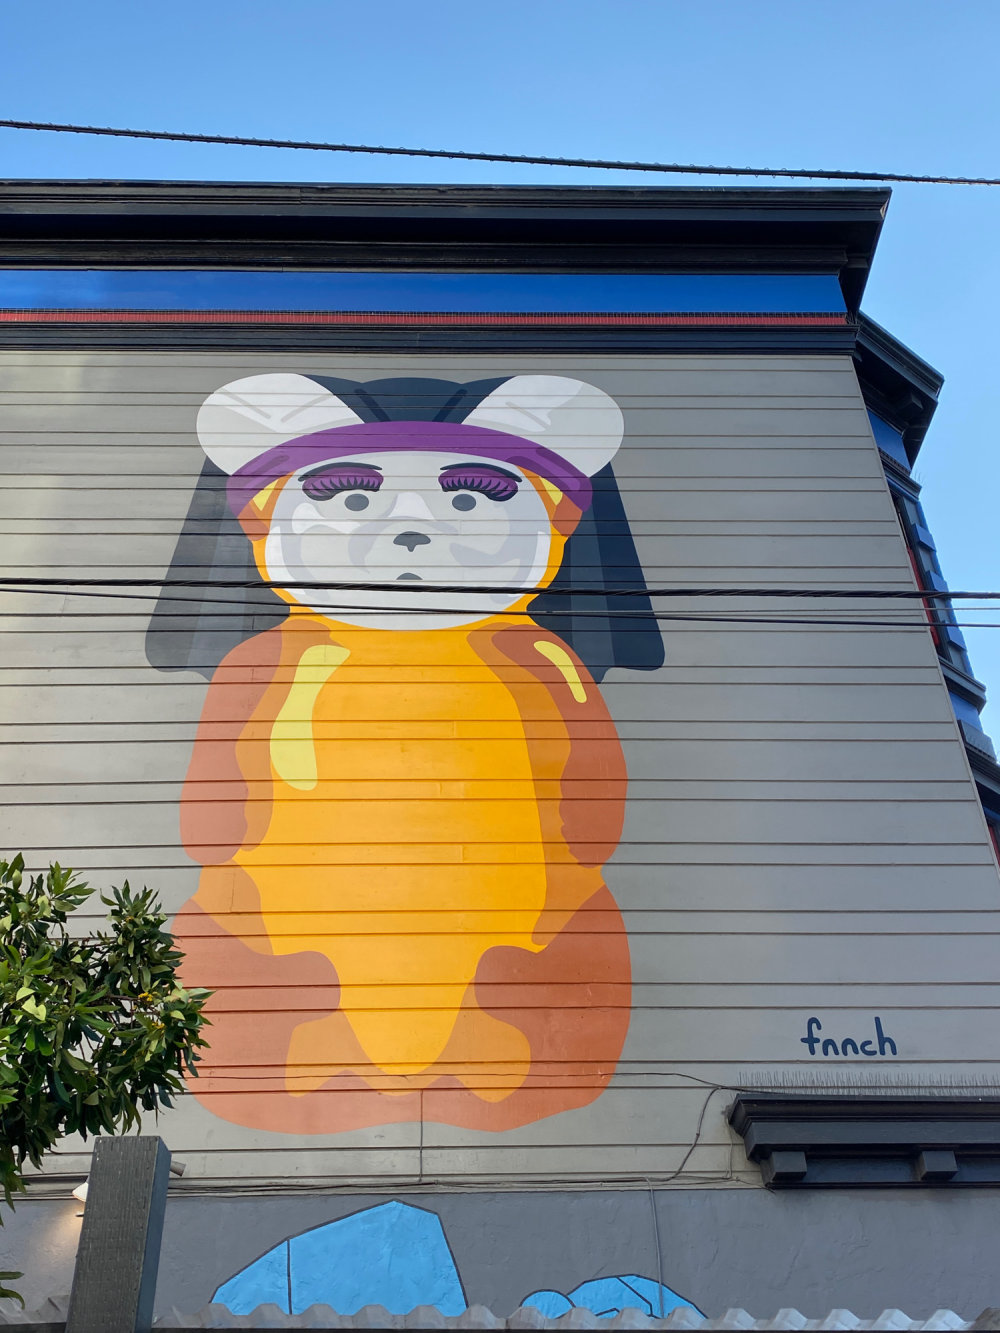 mural in San Francisco by artist fnnch.